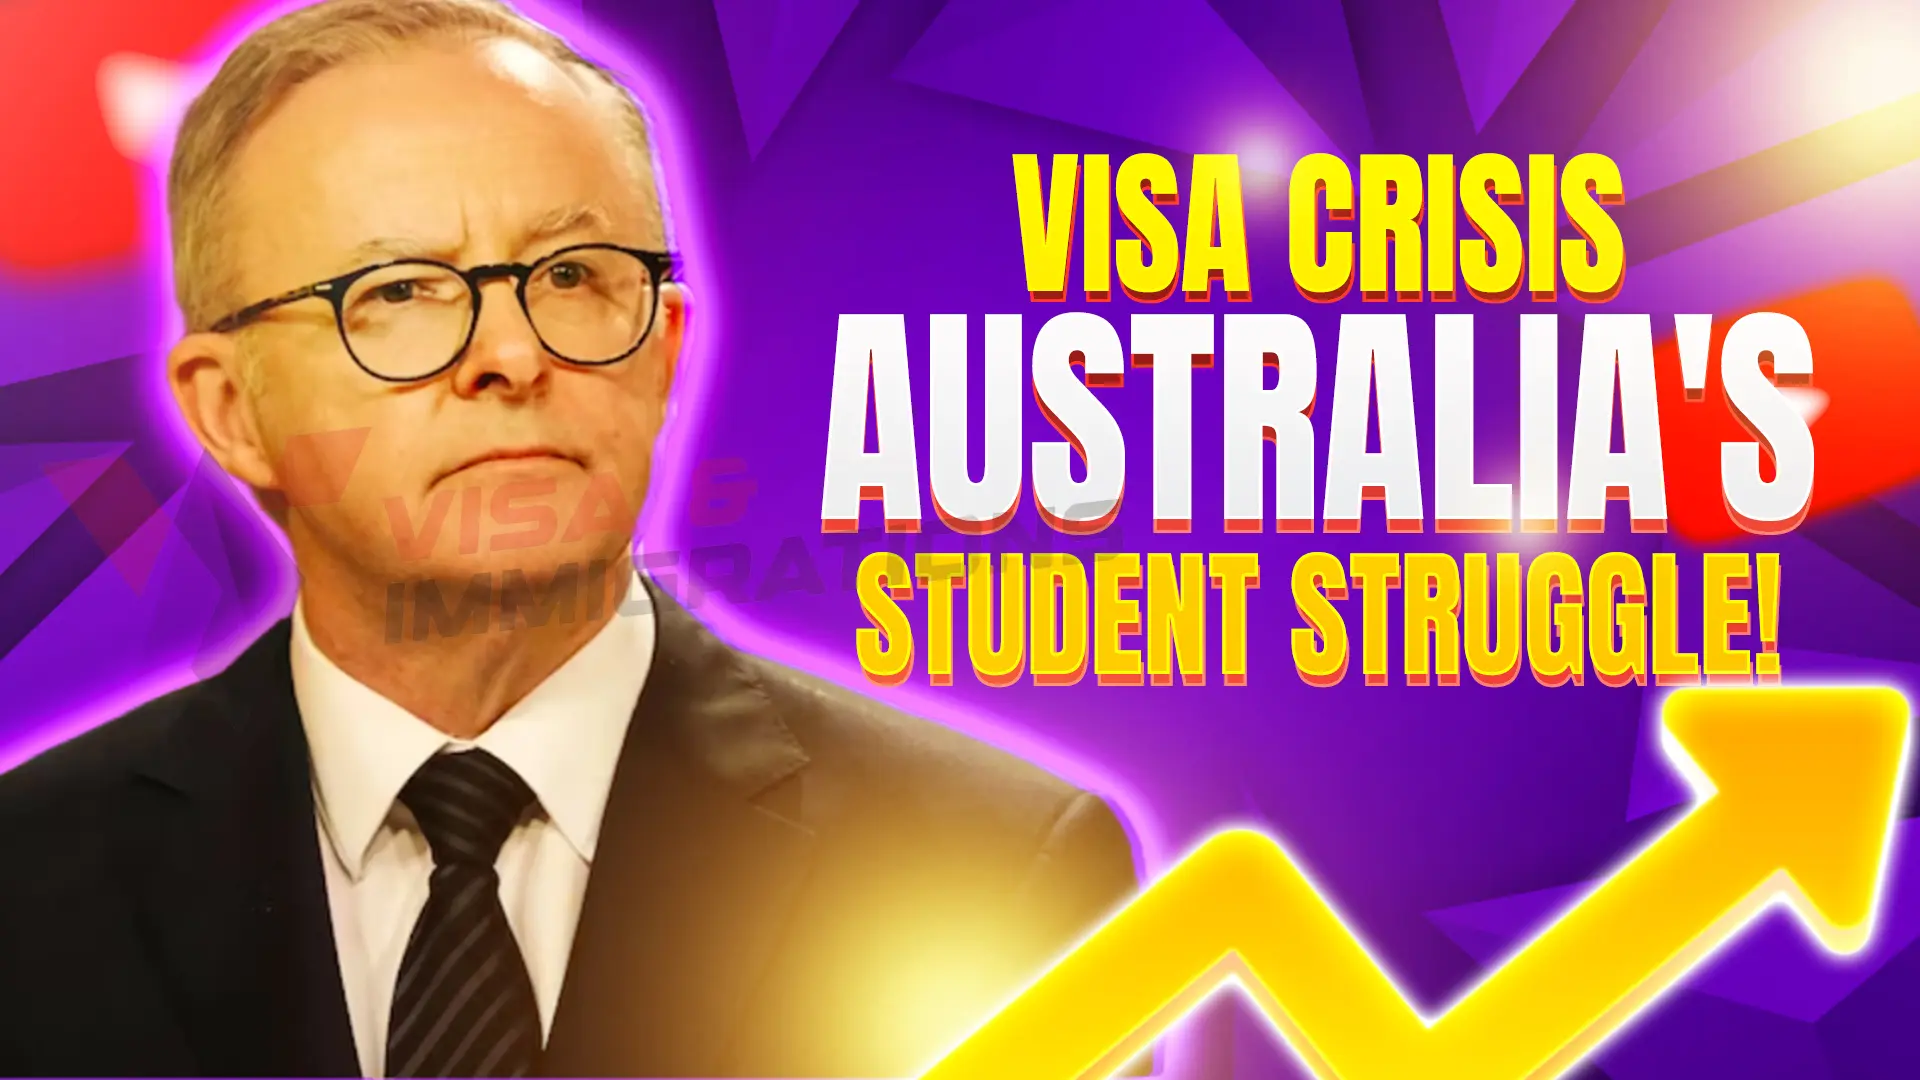 Australian Visa Rejection Rates Spike as Universities Withdraw Admission Offers